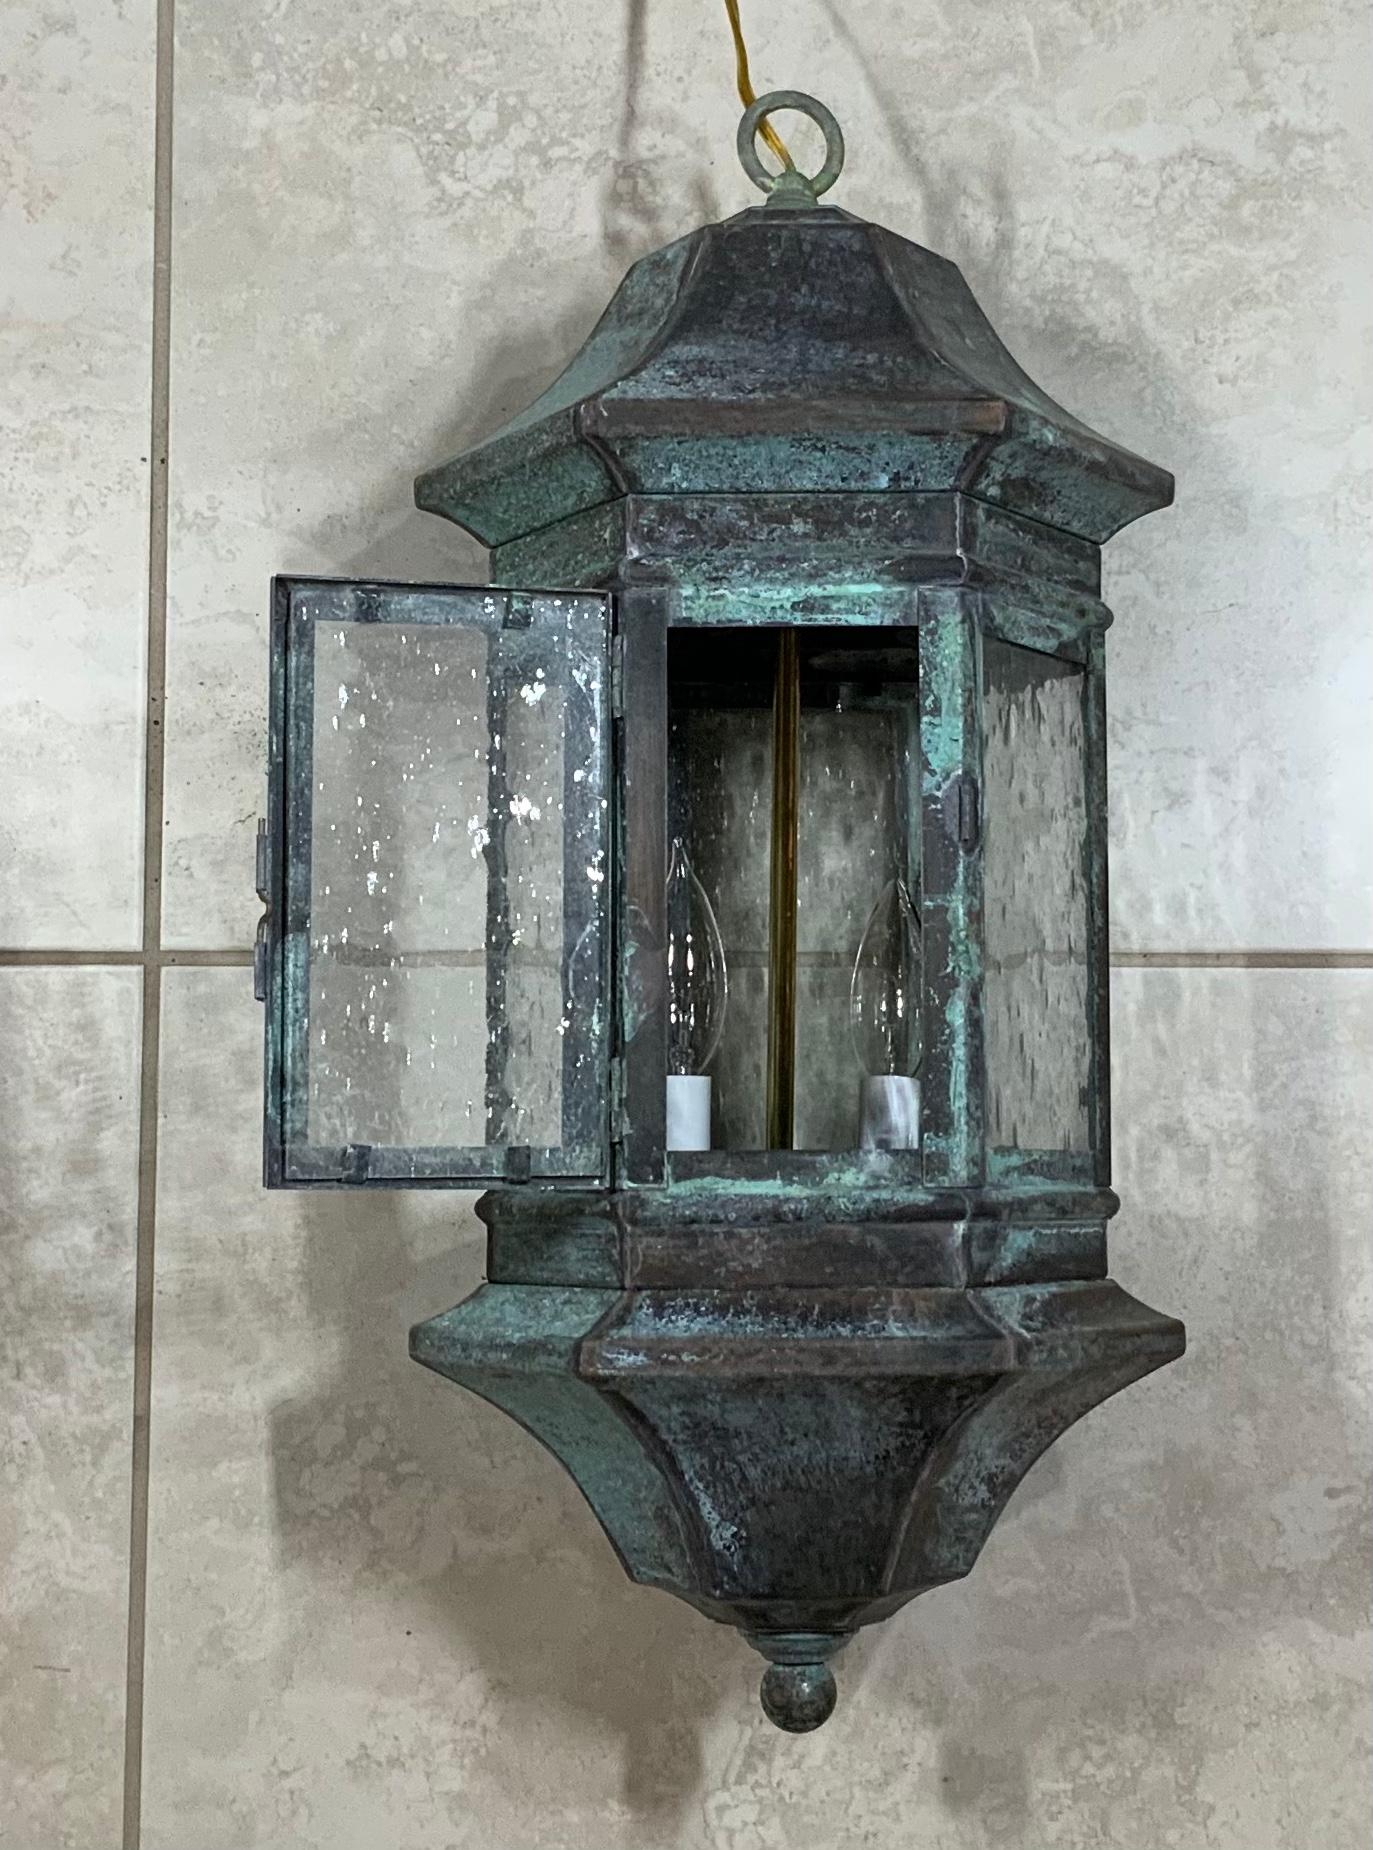 Hanging lantern made of solid brass, seeded frosty glass, originally it was wall lantern converted to hanging lantern or chandelier , re-electrified with new brass stem with two 60/watt lights suitable for wet location.
Beautiful patina, and ready